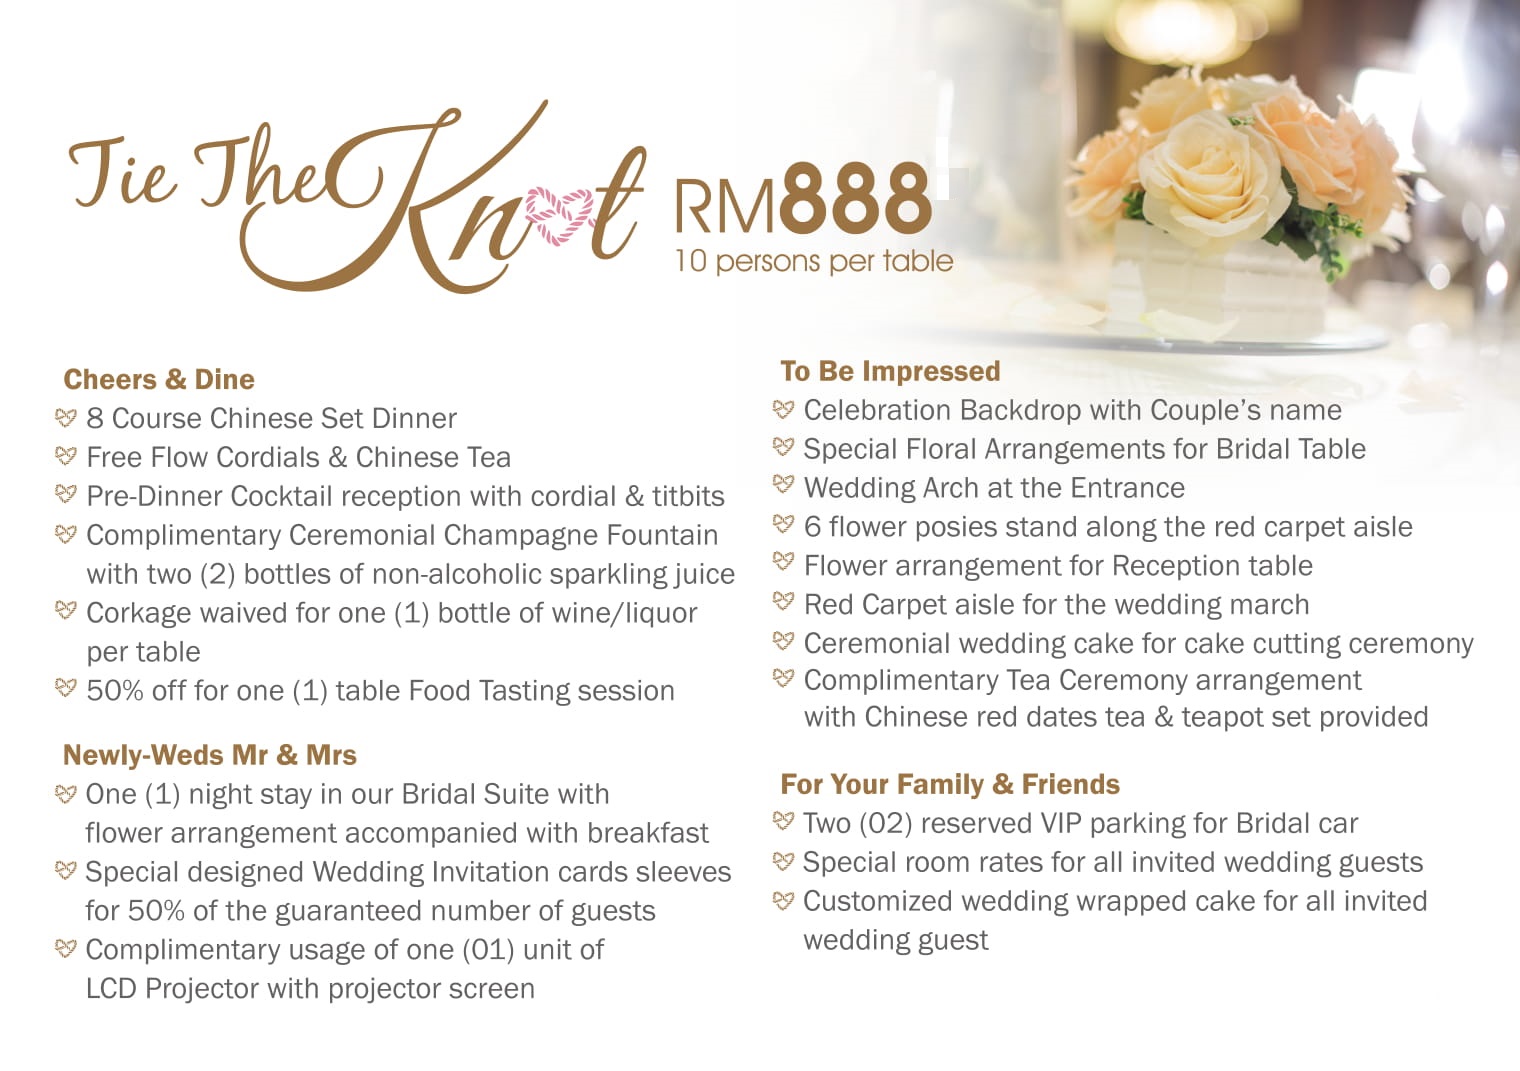 Iconic Hotel's Wedding Packages